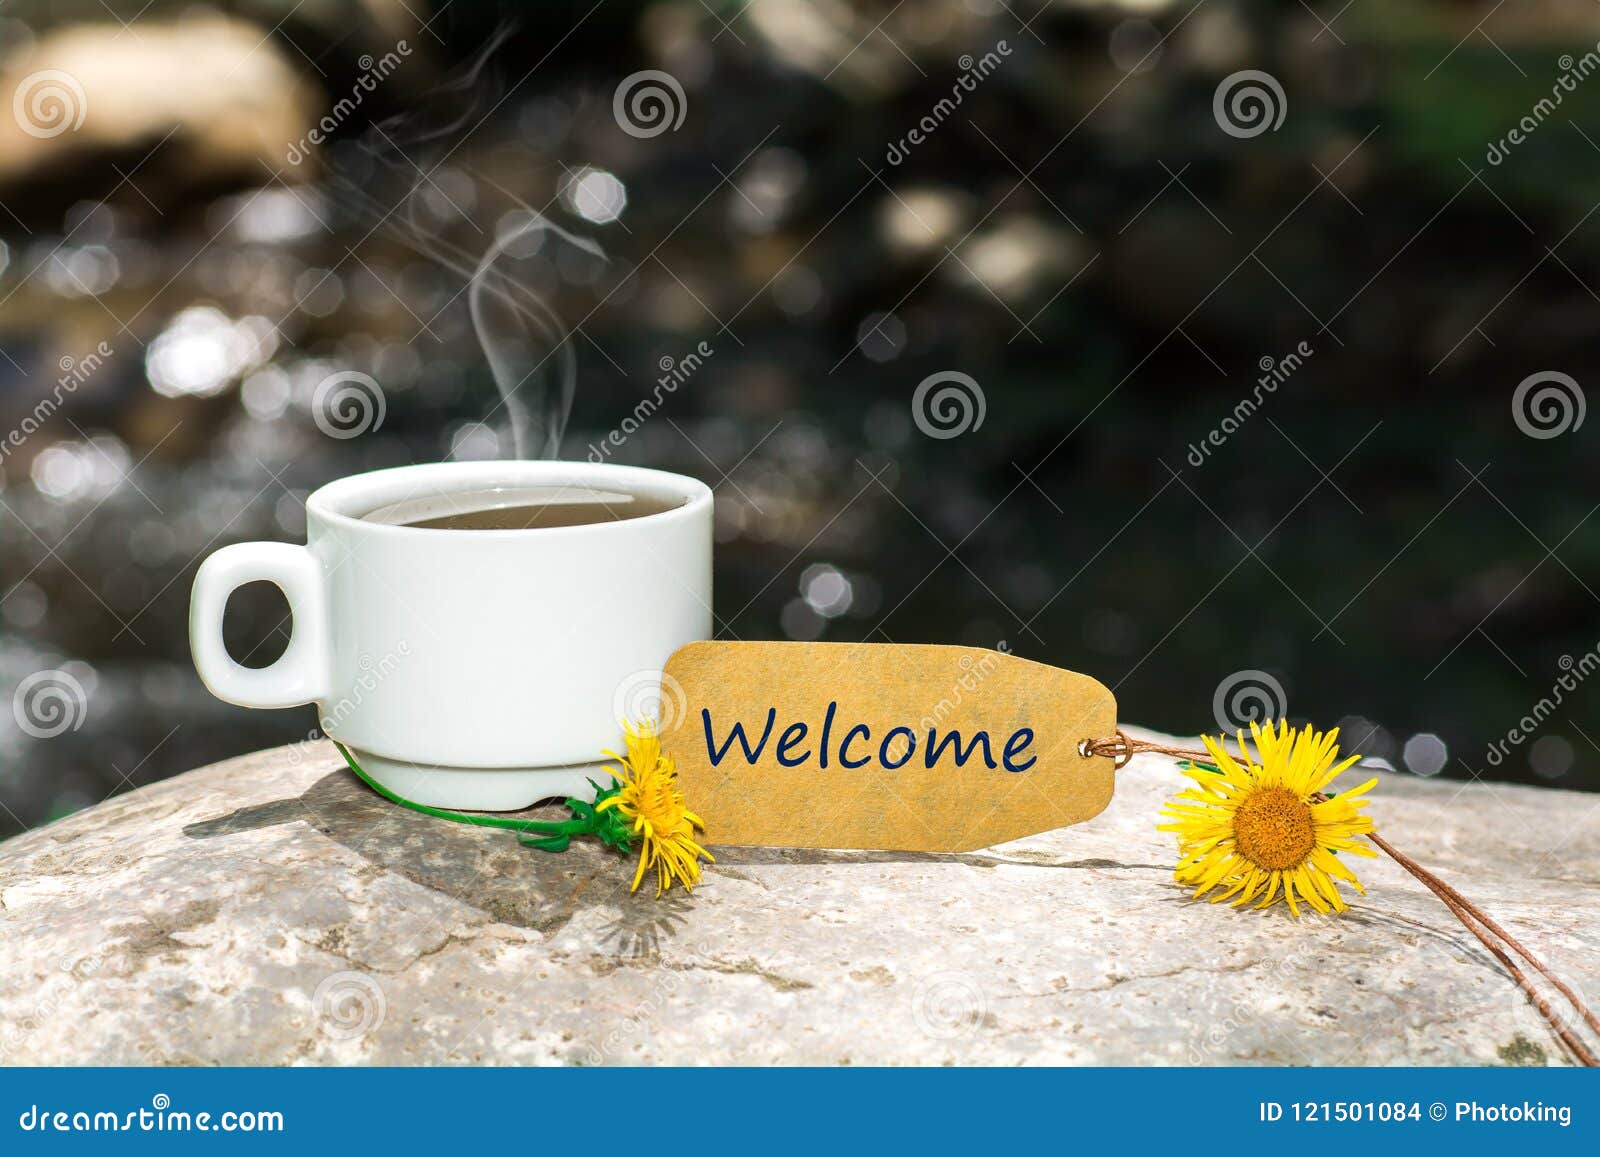 welcome text with coffee cup